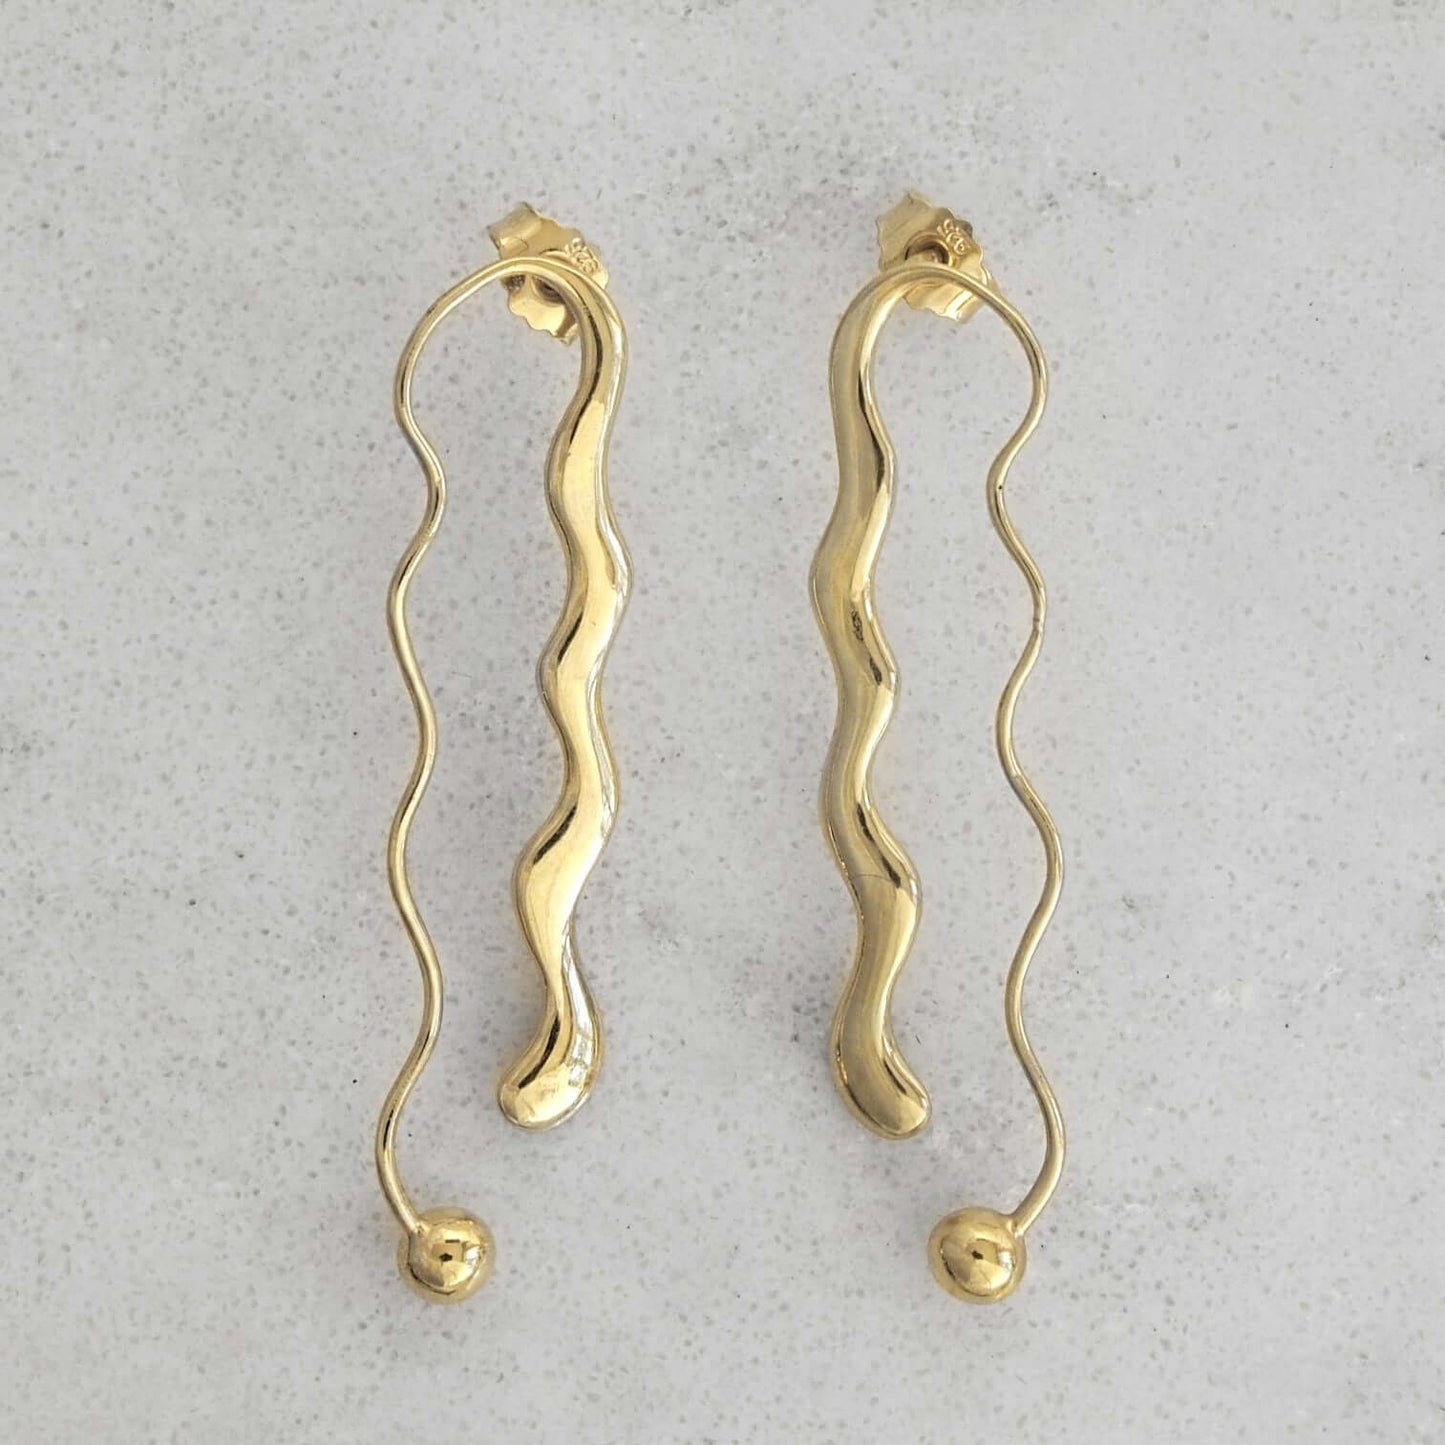 Product photo of a pair of gold earrings on a marble plate